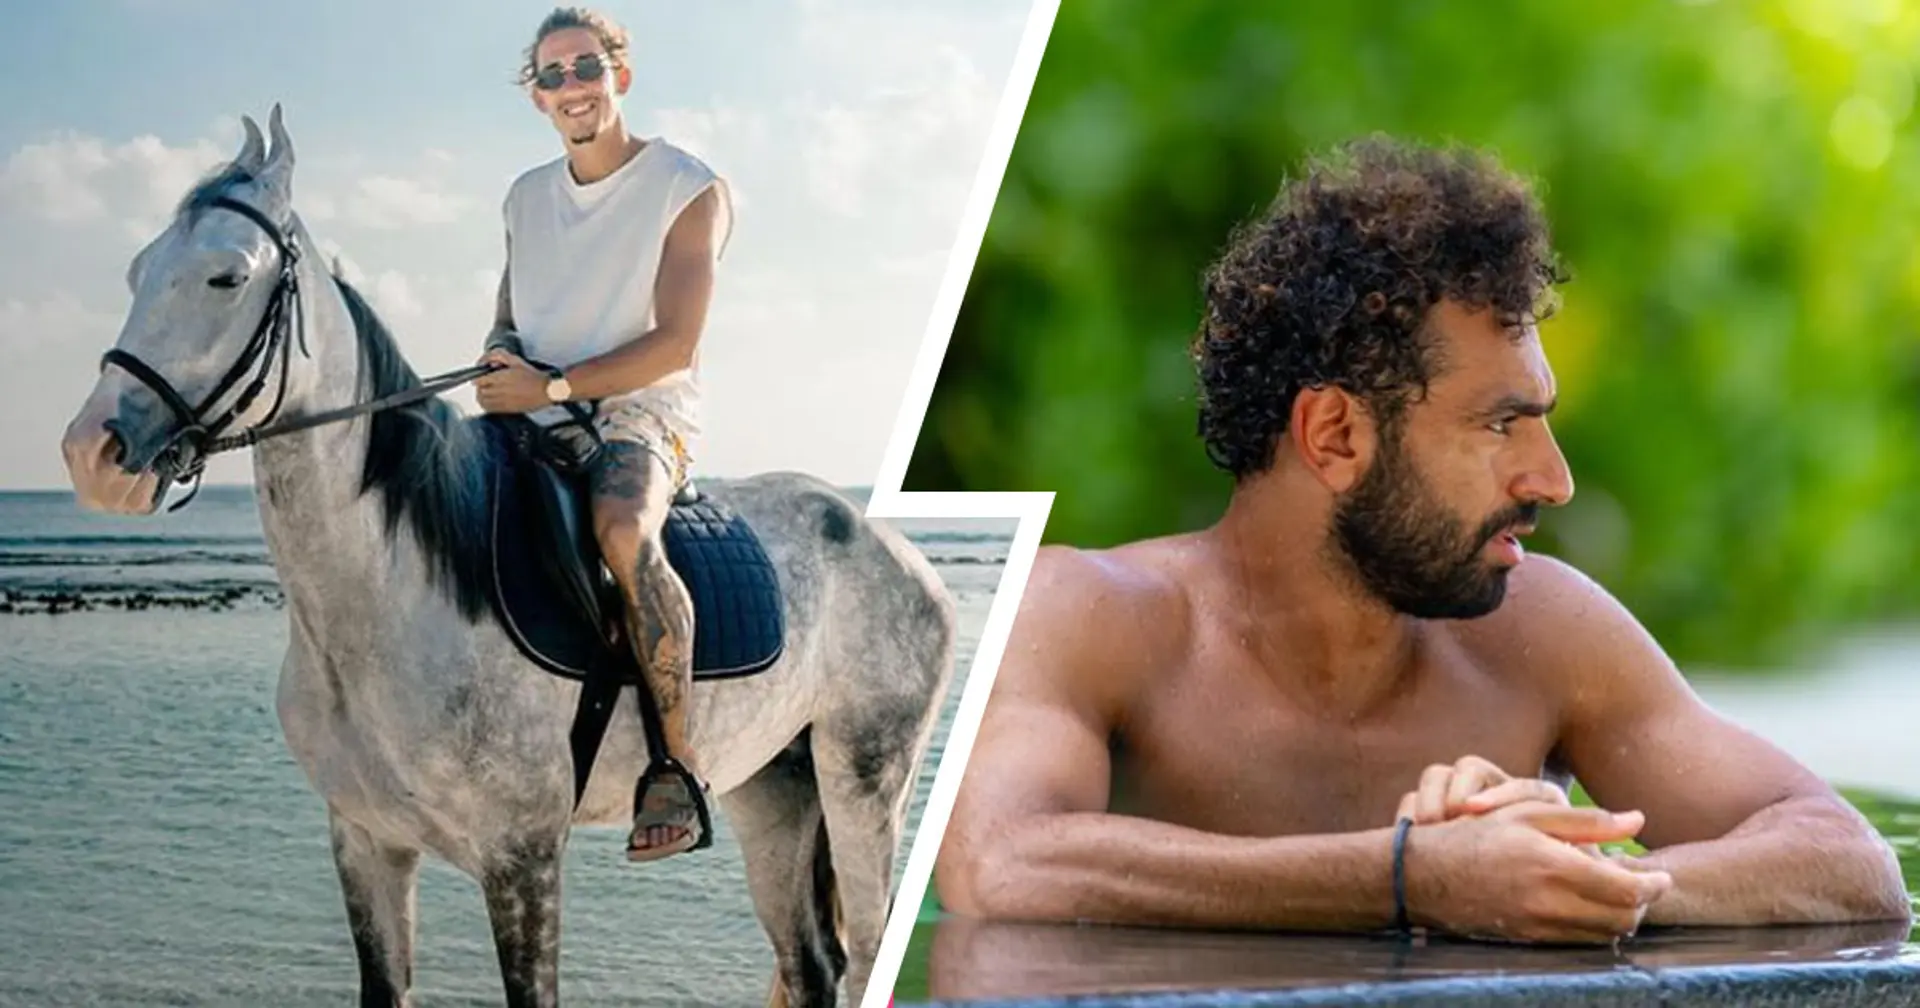 Tsimikas on horseback, Carvalho parties with Man United star & more: how Liverpool players are spending World Cup break